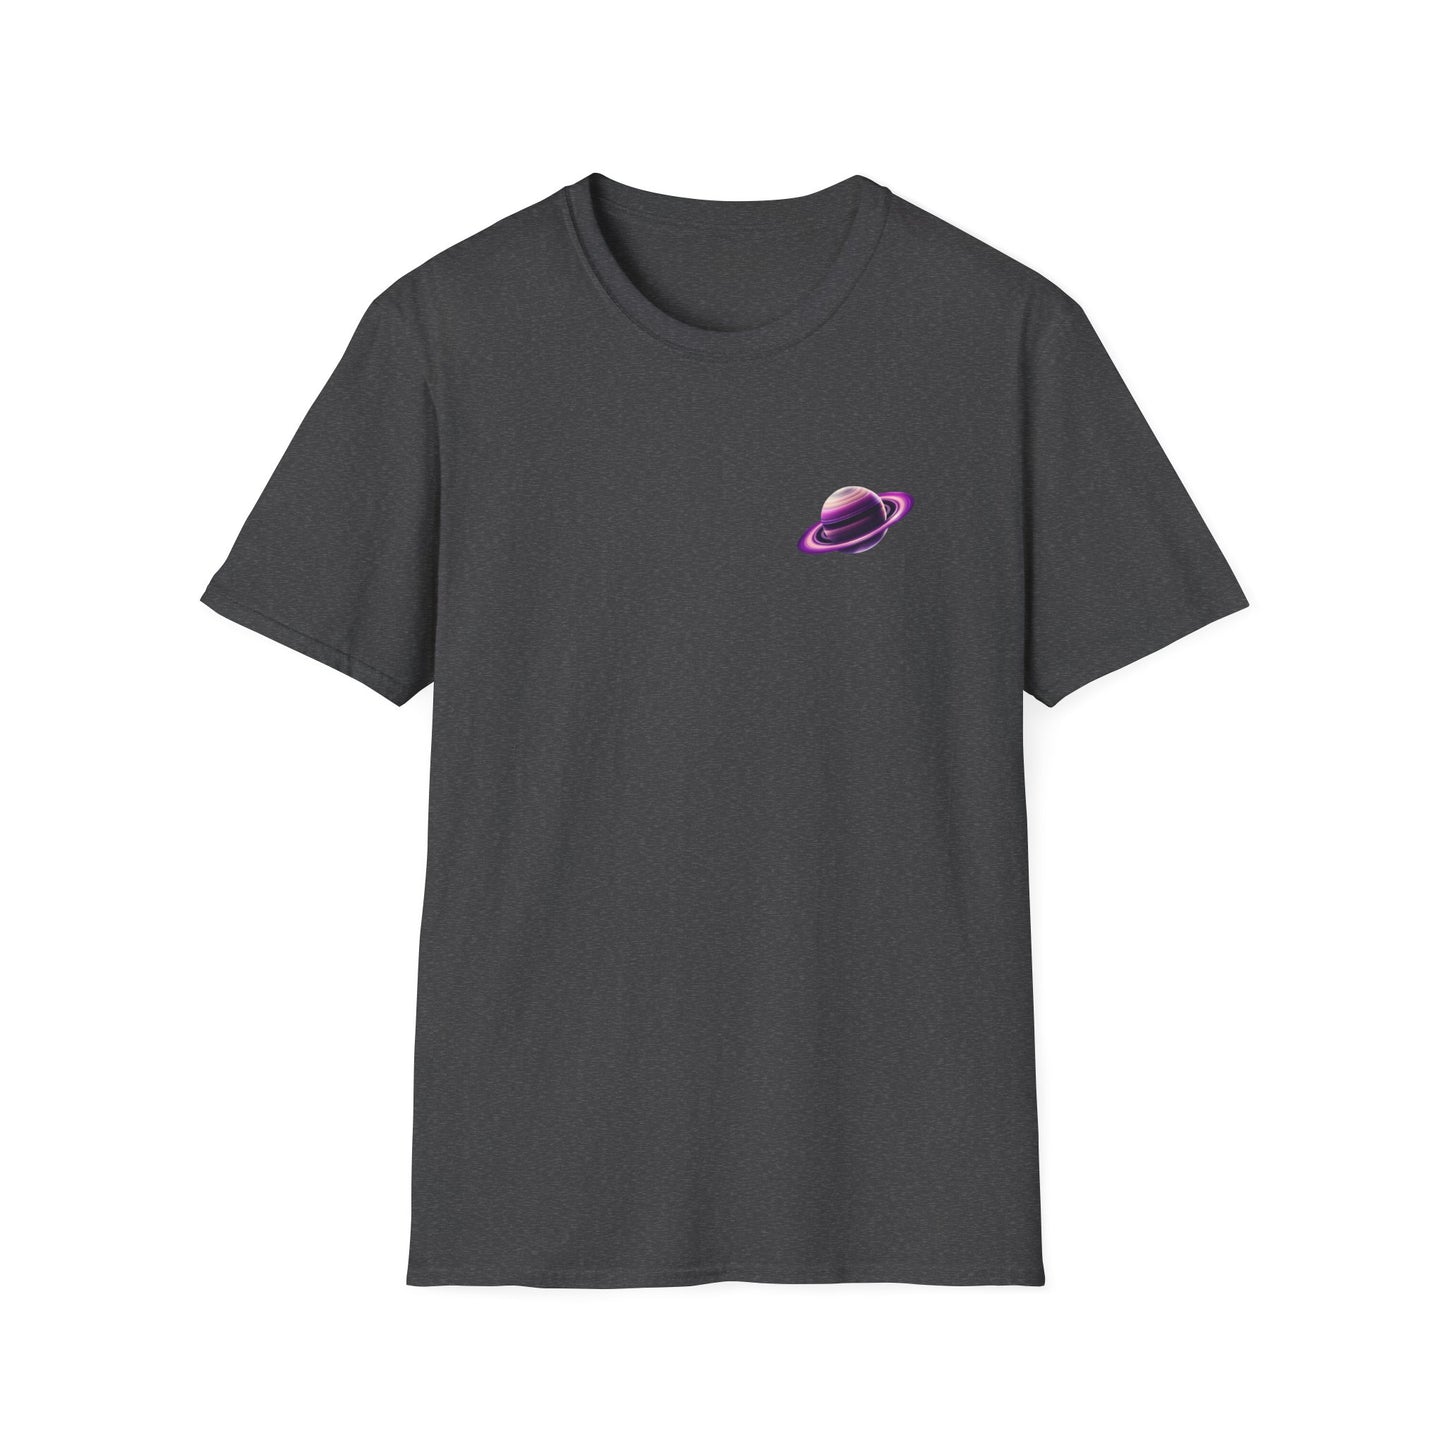 Asexual planet, T-Shirt